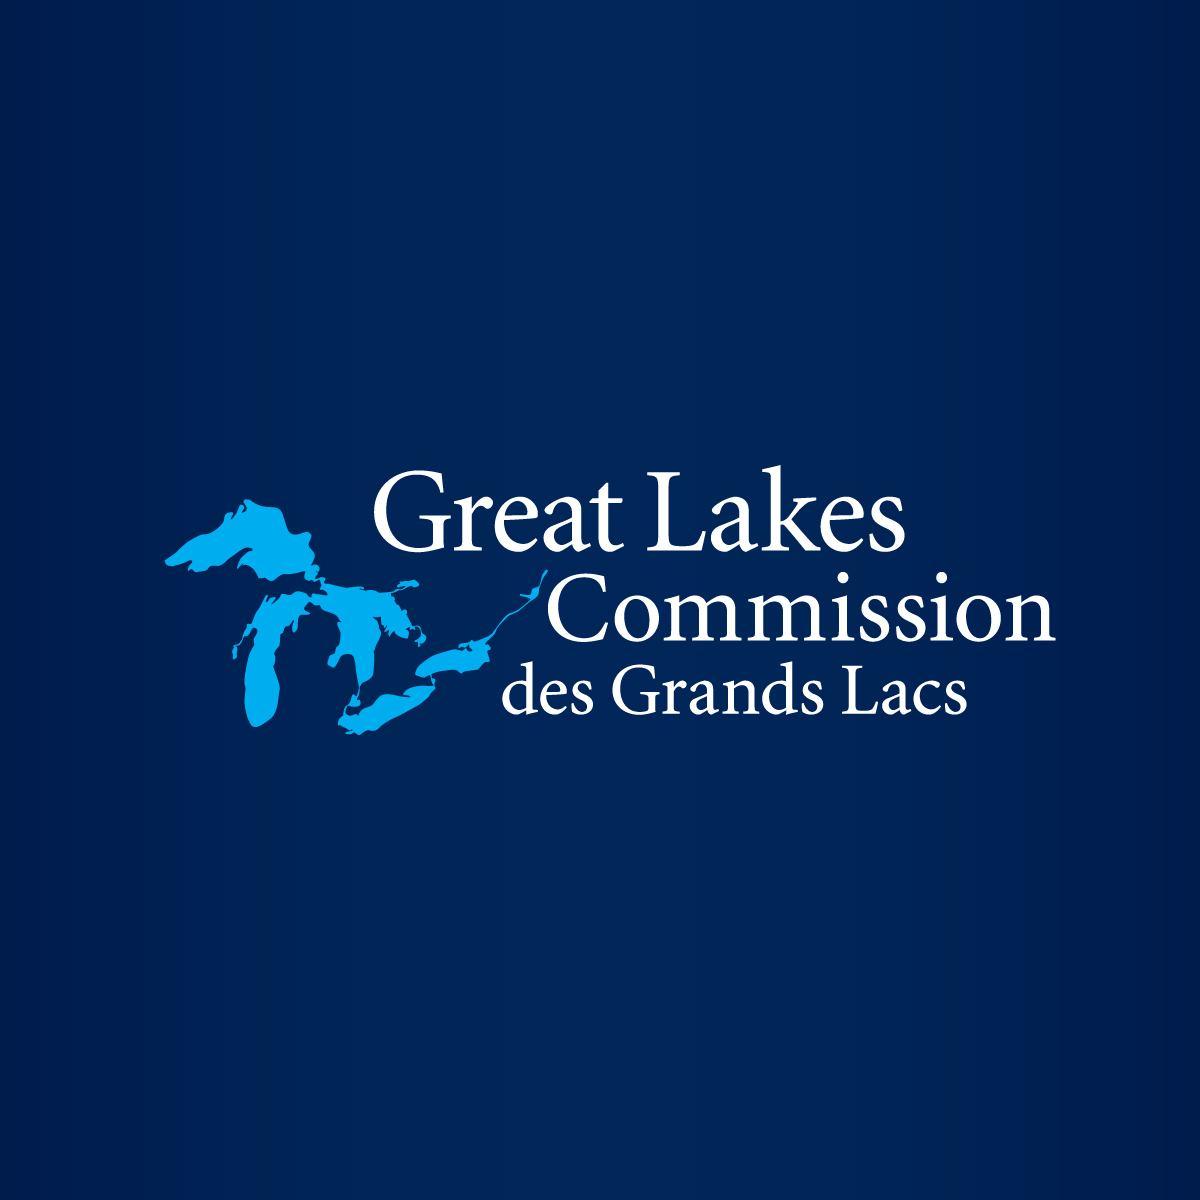 vision being developed for fledgling great lakes authority